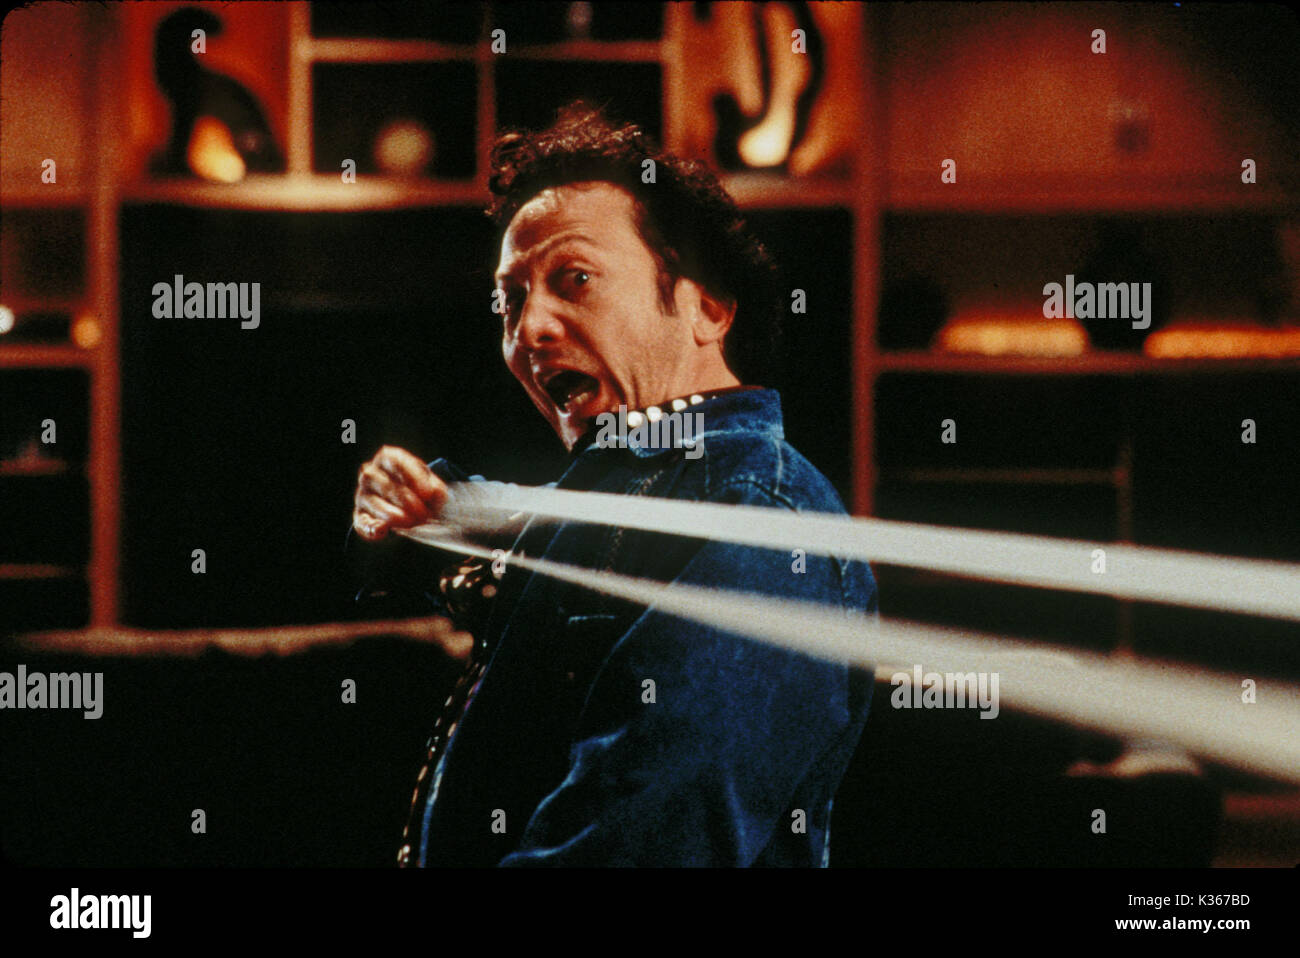 DEUCE BIGALOW : MALE GIOLO ROB SCHNEIDER FILM RELEASE BY TOUCHSTONE PICTURES DEUCE BIGALOW : MALE GIGOLO ROB SCHNEIDER date : 1999 Banque D'Images